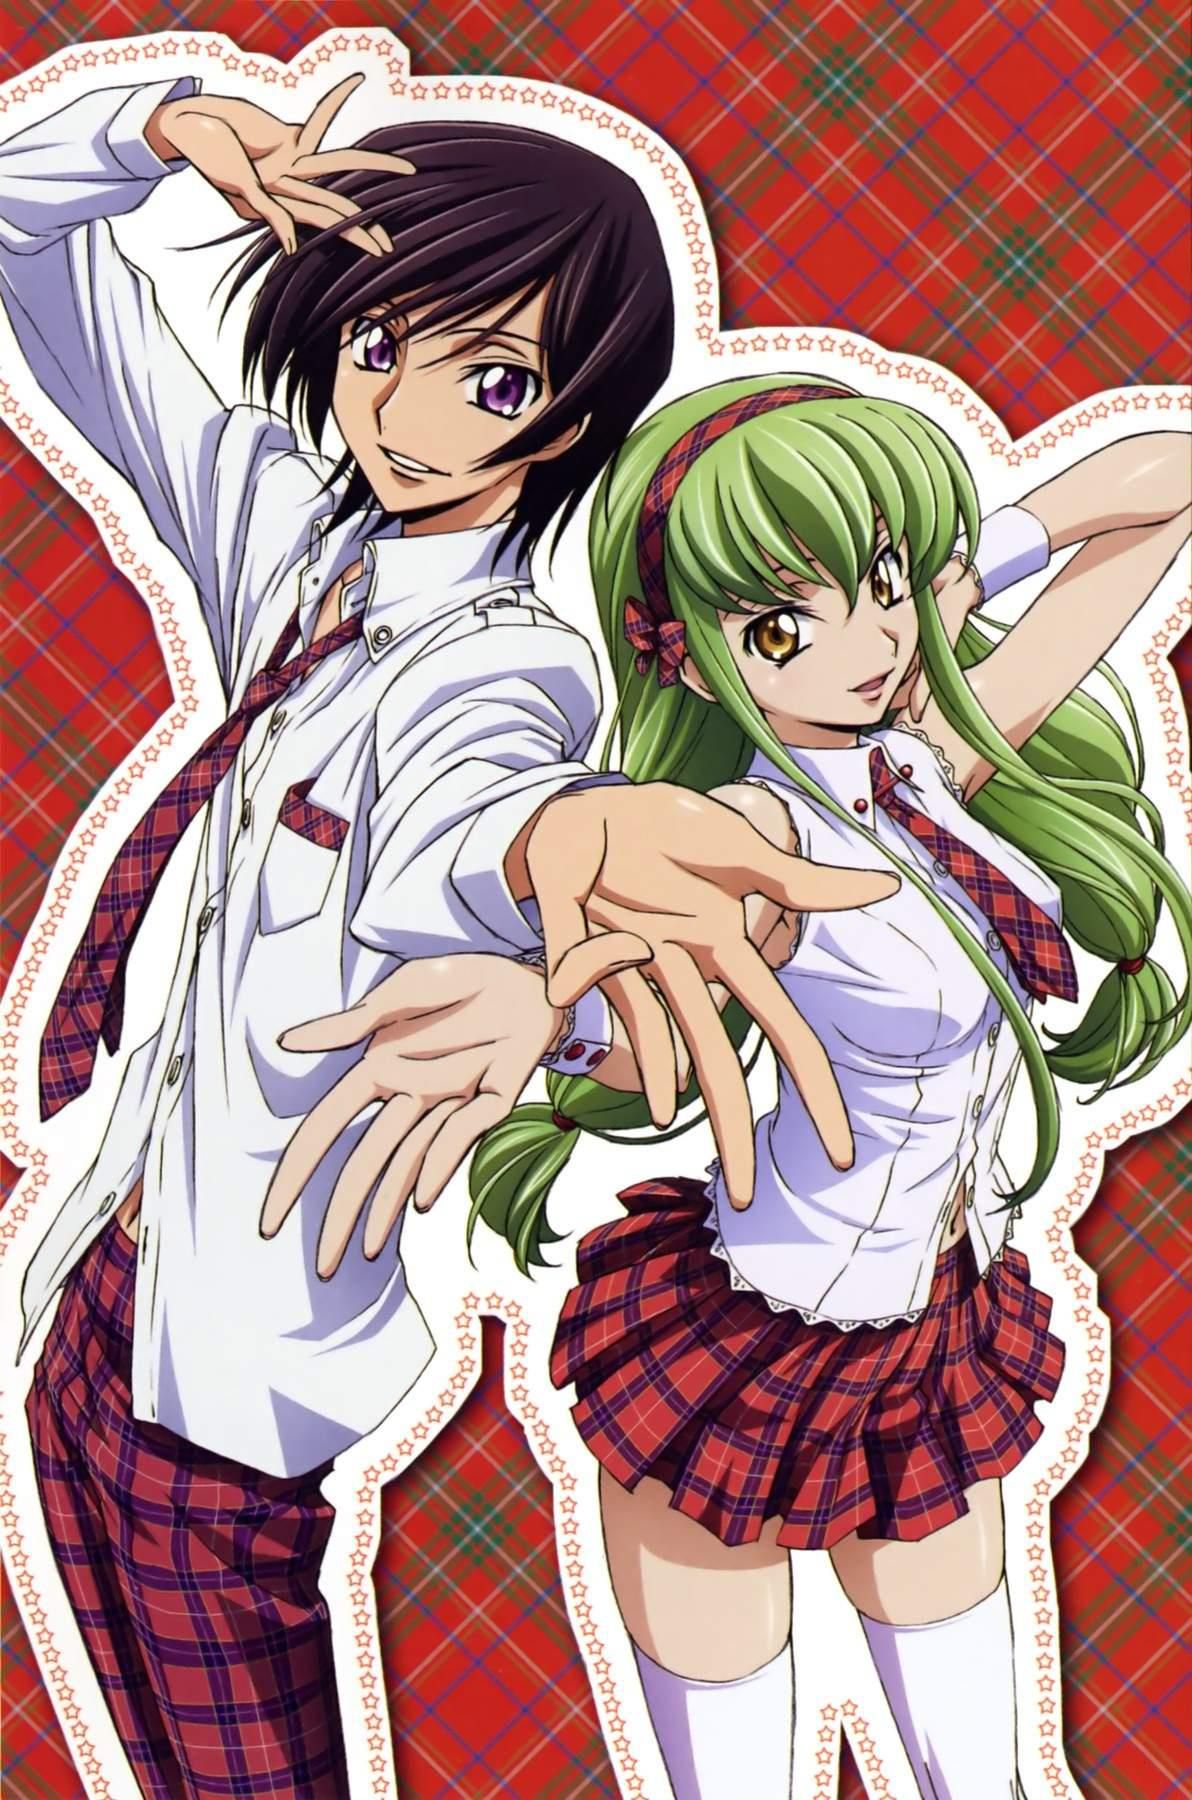 Secondary Code Geass hentai pictures 2